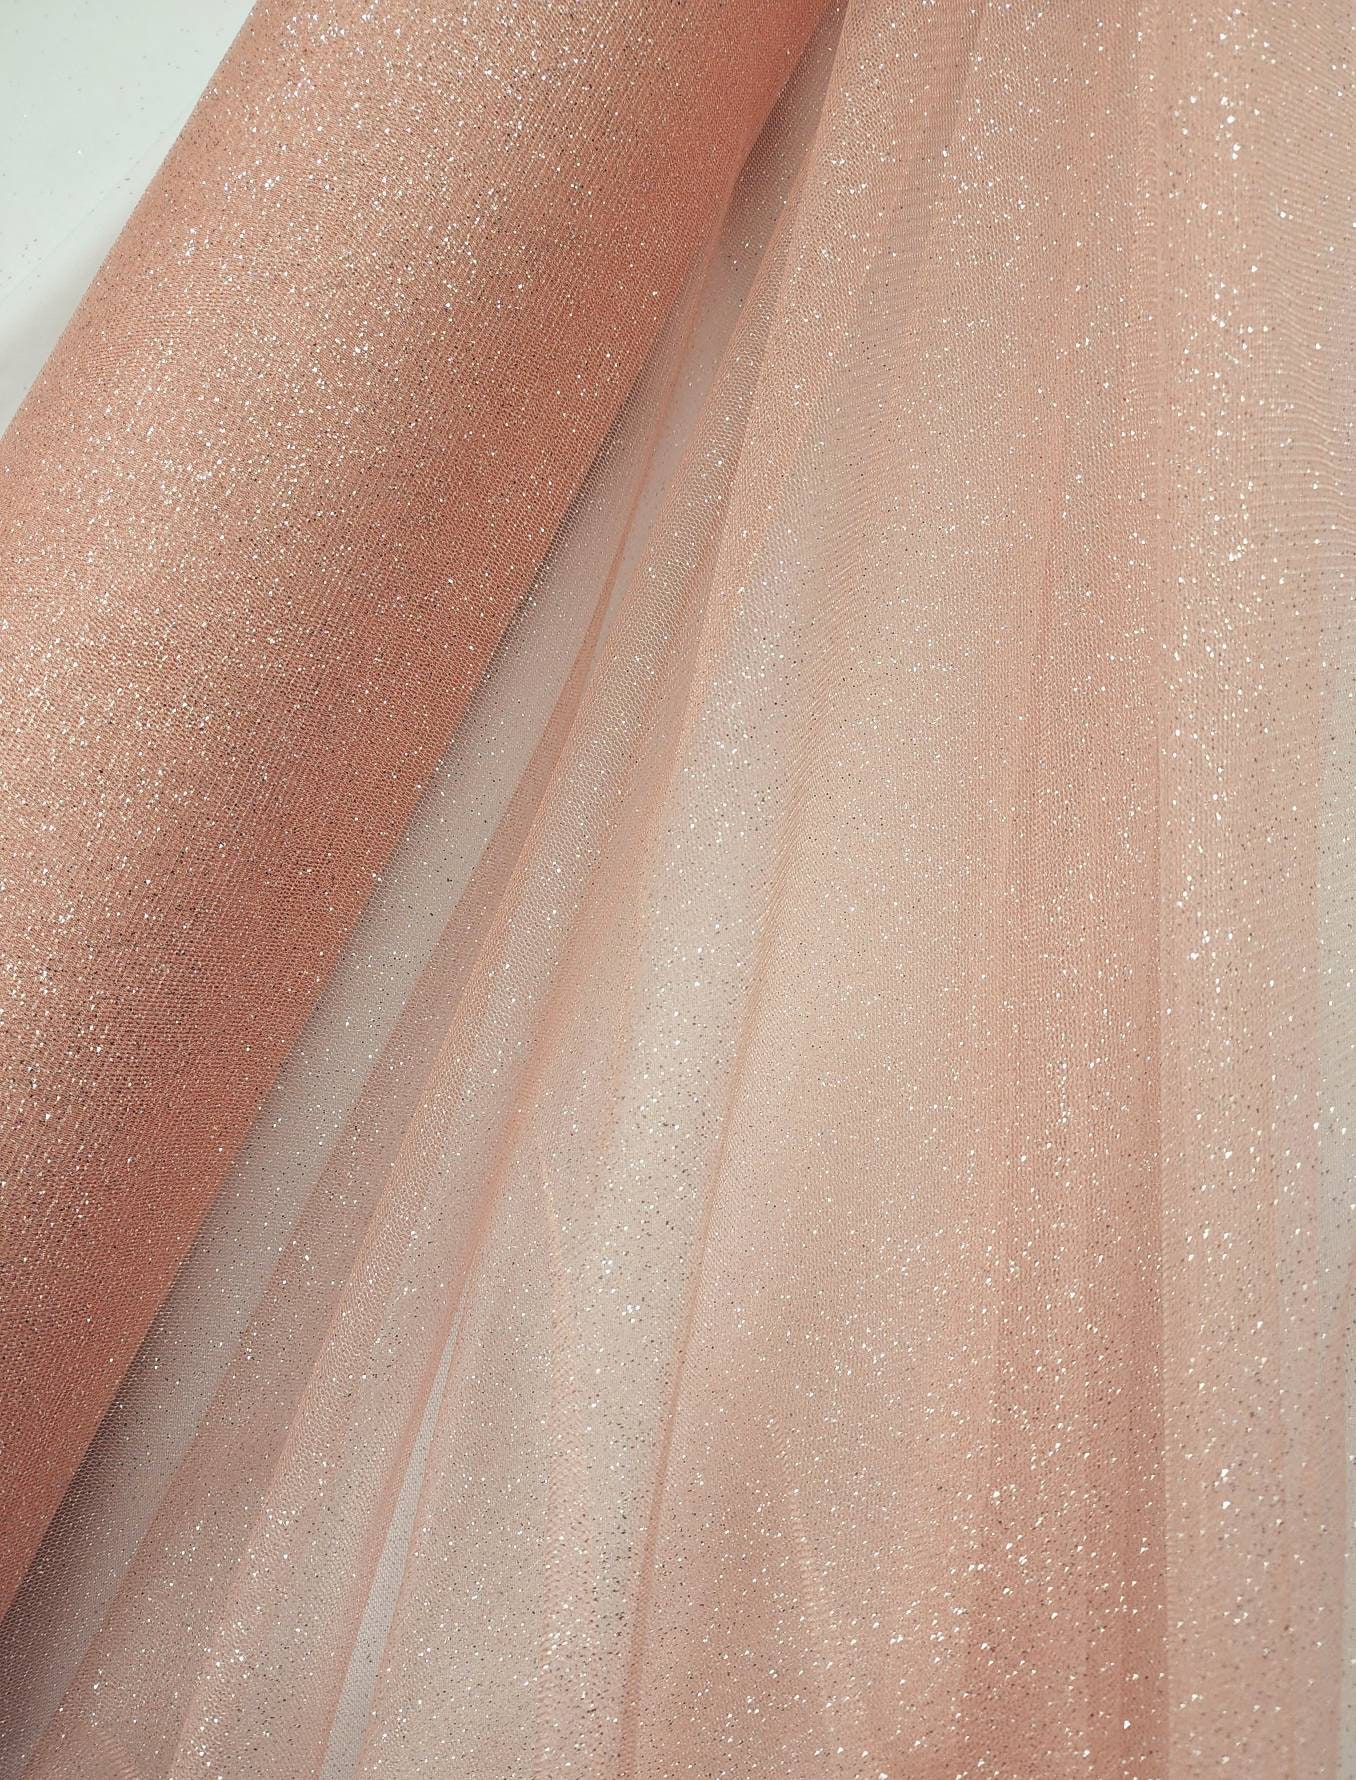 Floral Tulle Lace, Daisy Tulle Dress Fabric, Light Pink / Peach Tulle Lace  Fabric, Daisy Flower Lace Fabric by Yard 